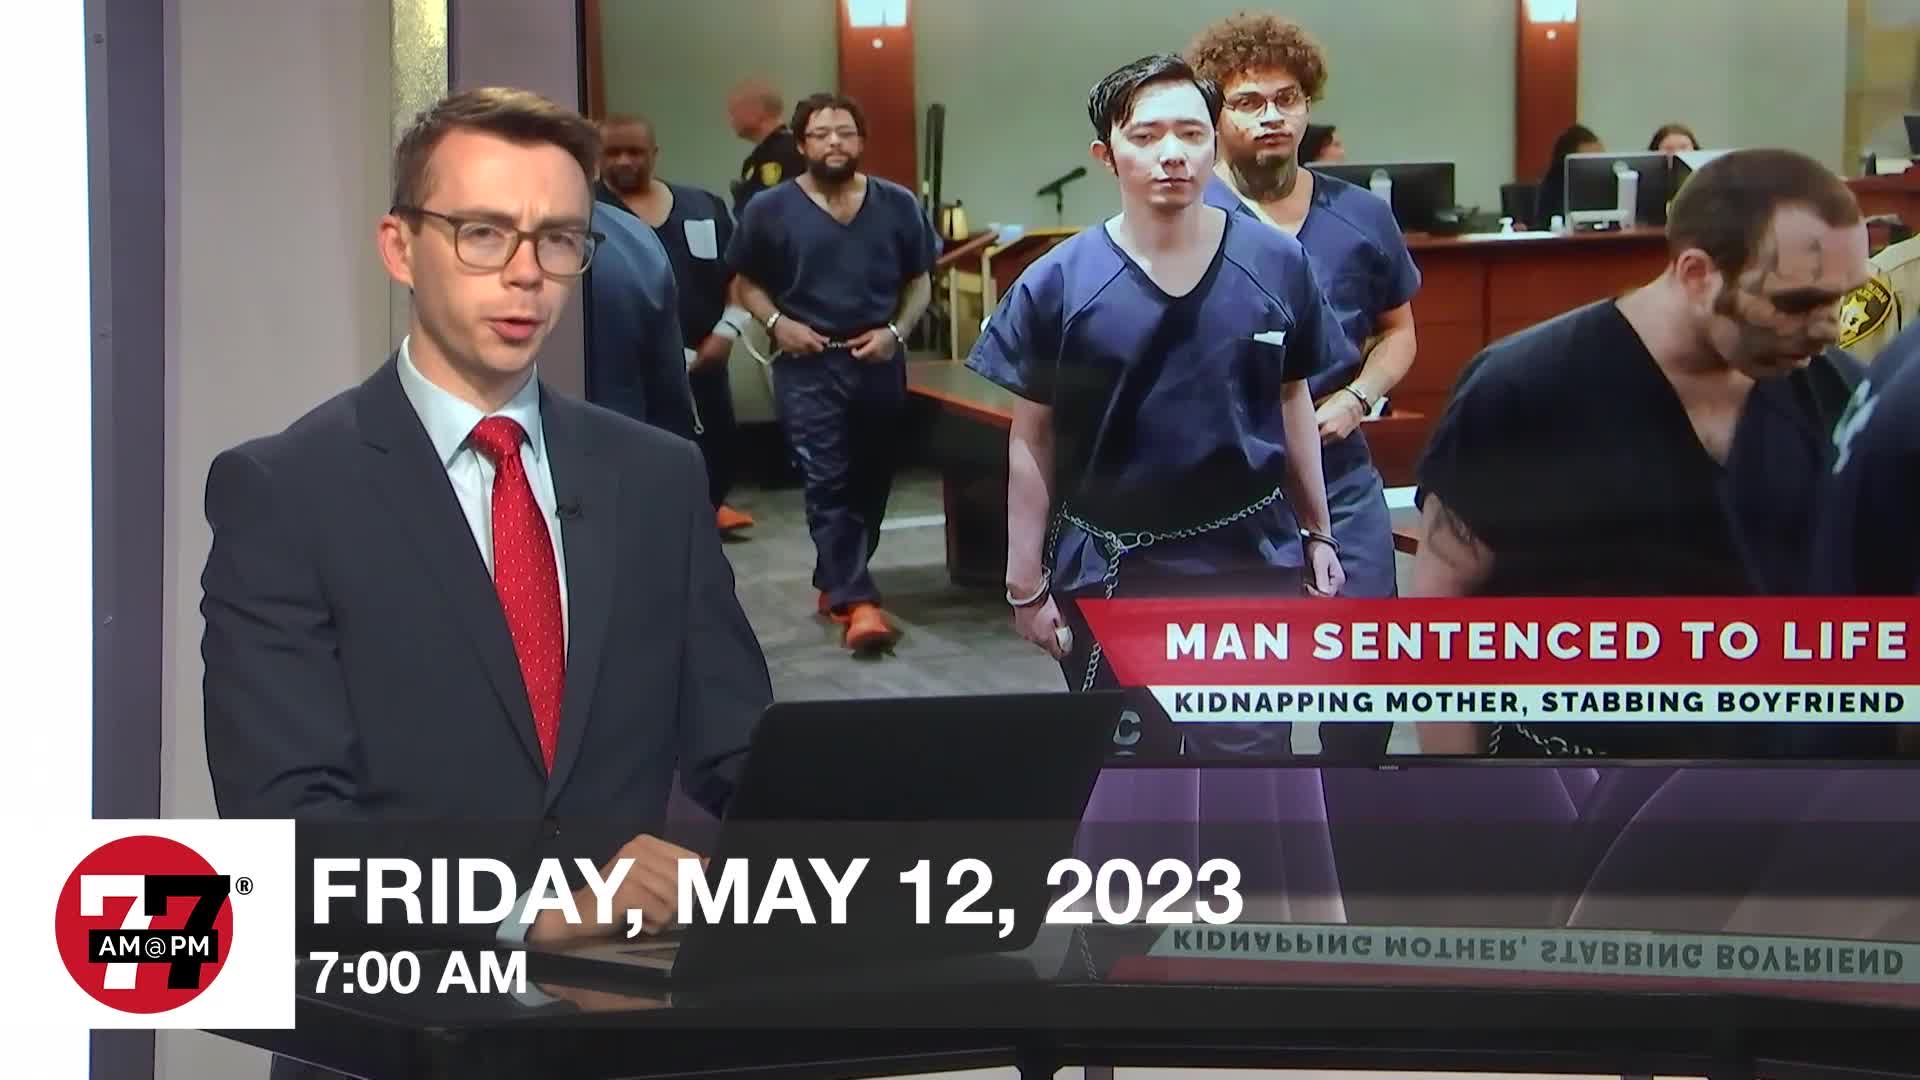 Las Vegas News | 7@7 AM for Friday, May 12, 2023